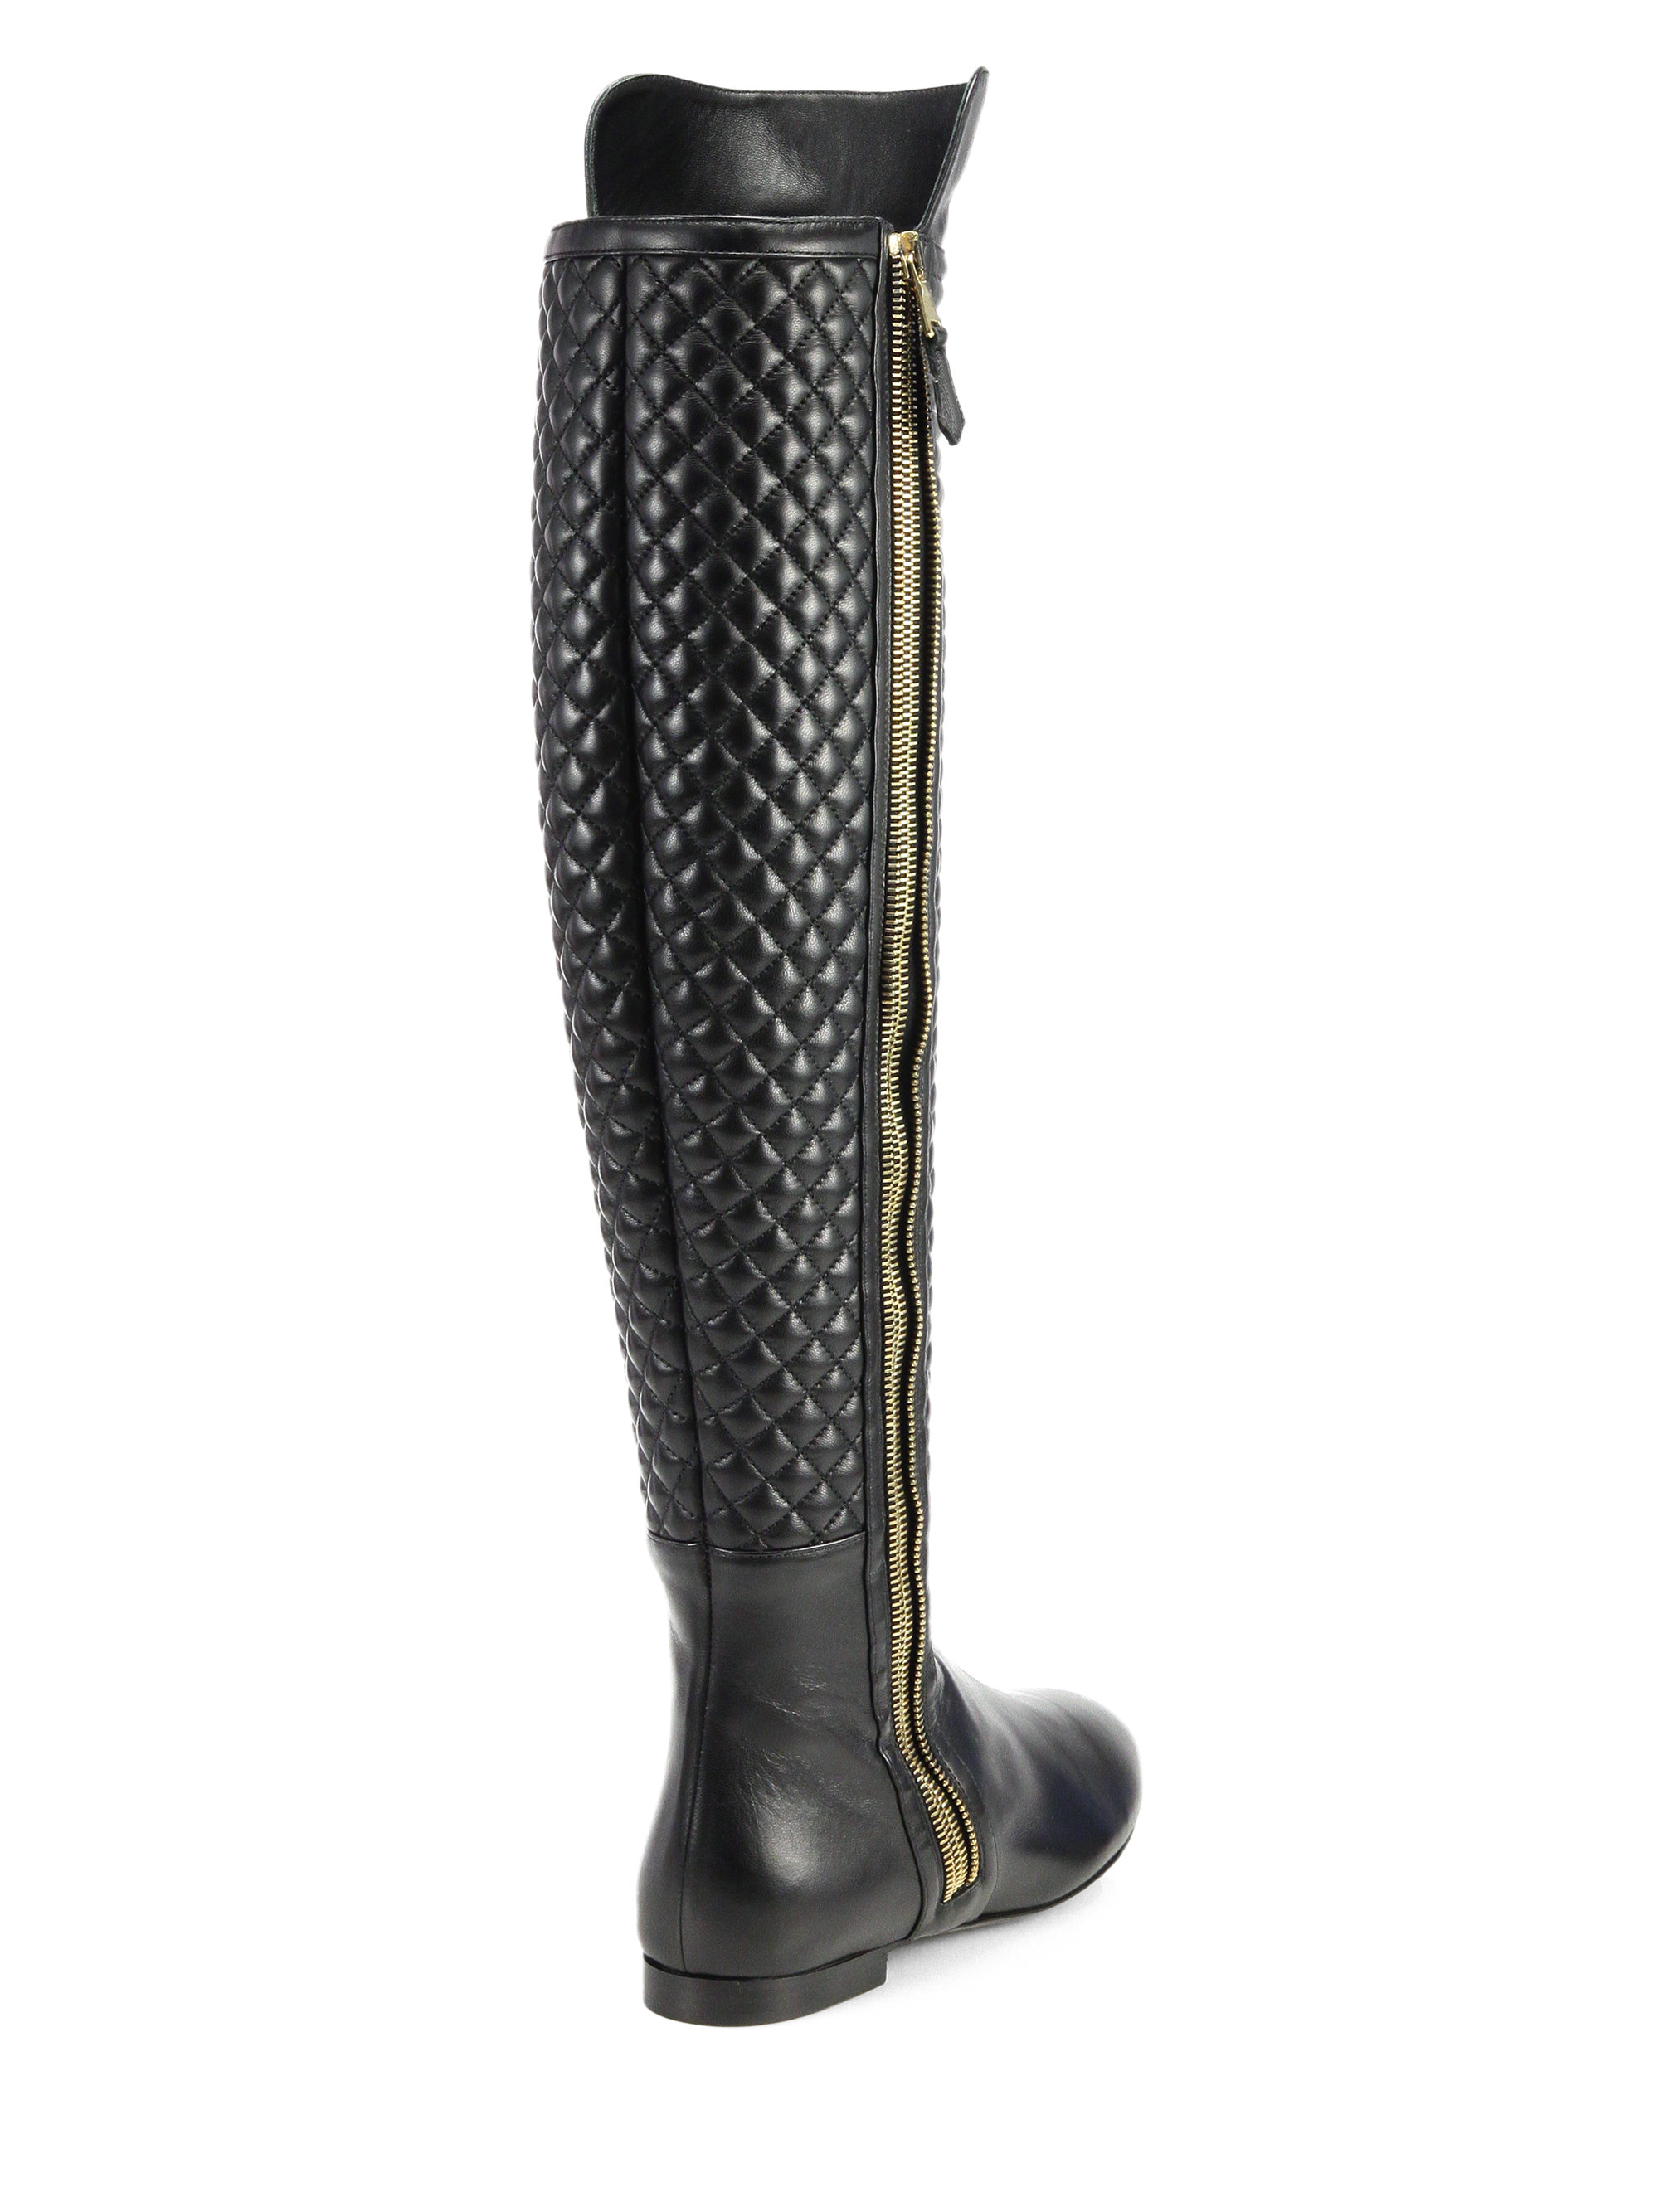 Lyst - Brian Atwood Ares Quilted Leather Kneehigh Boots in Black